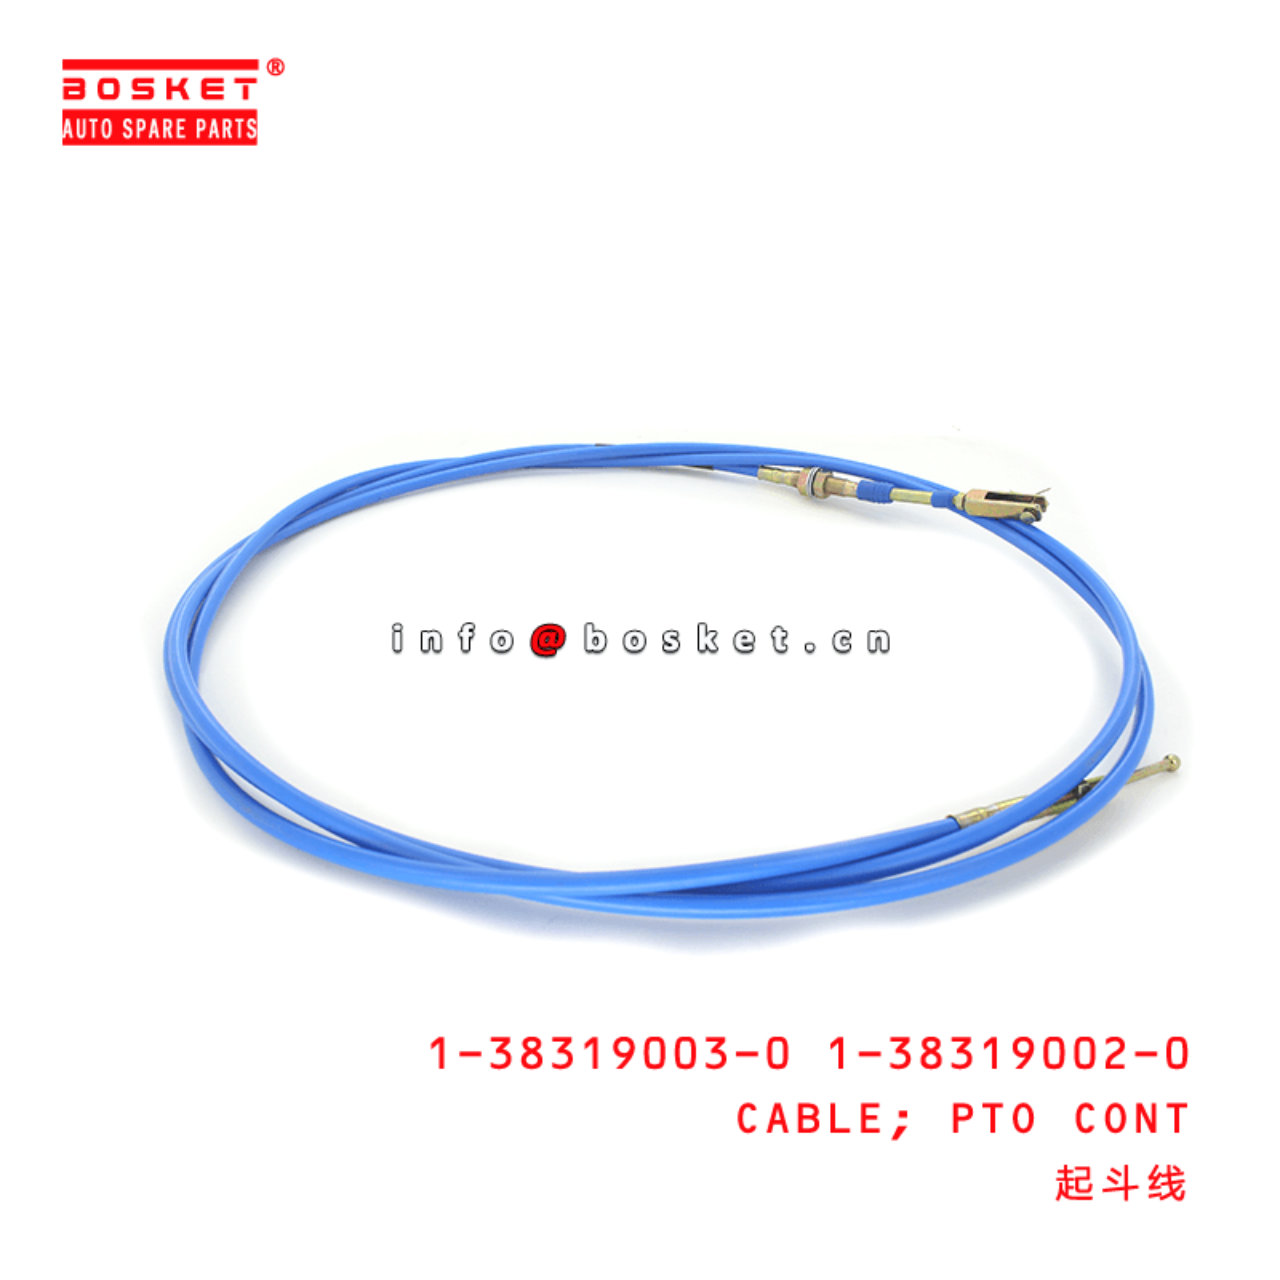 1-38319003-0 1-38319002-0 Power Take Off Control Cable 1383190030 1383190020 Suitable for ISUZU CXZ 